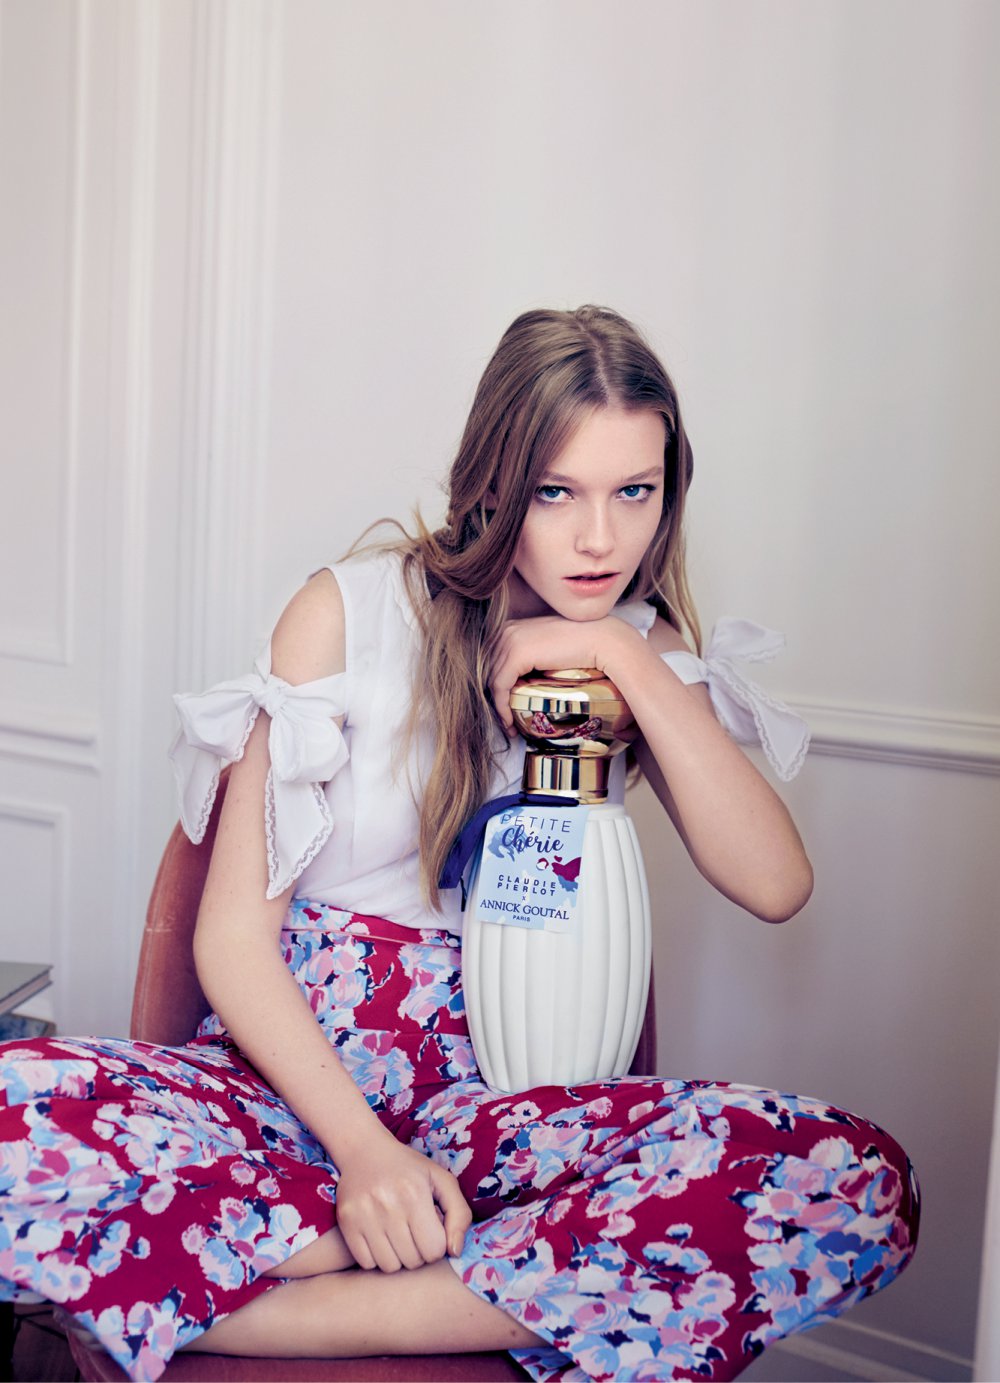 Claudie Pierlot X Annick Goutal: a fresh and supportive collab